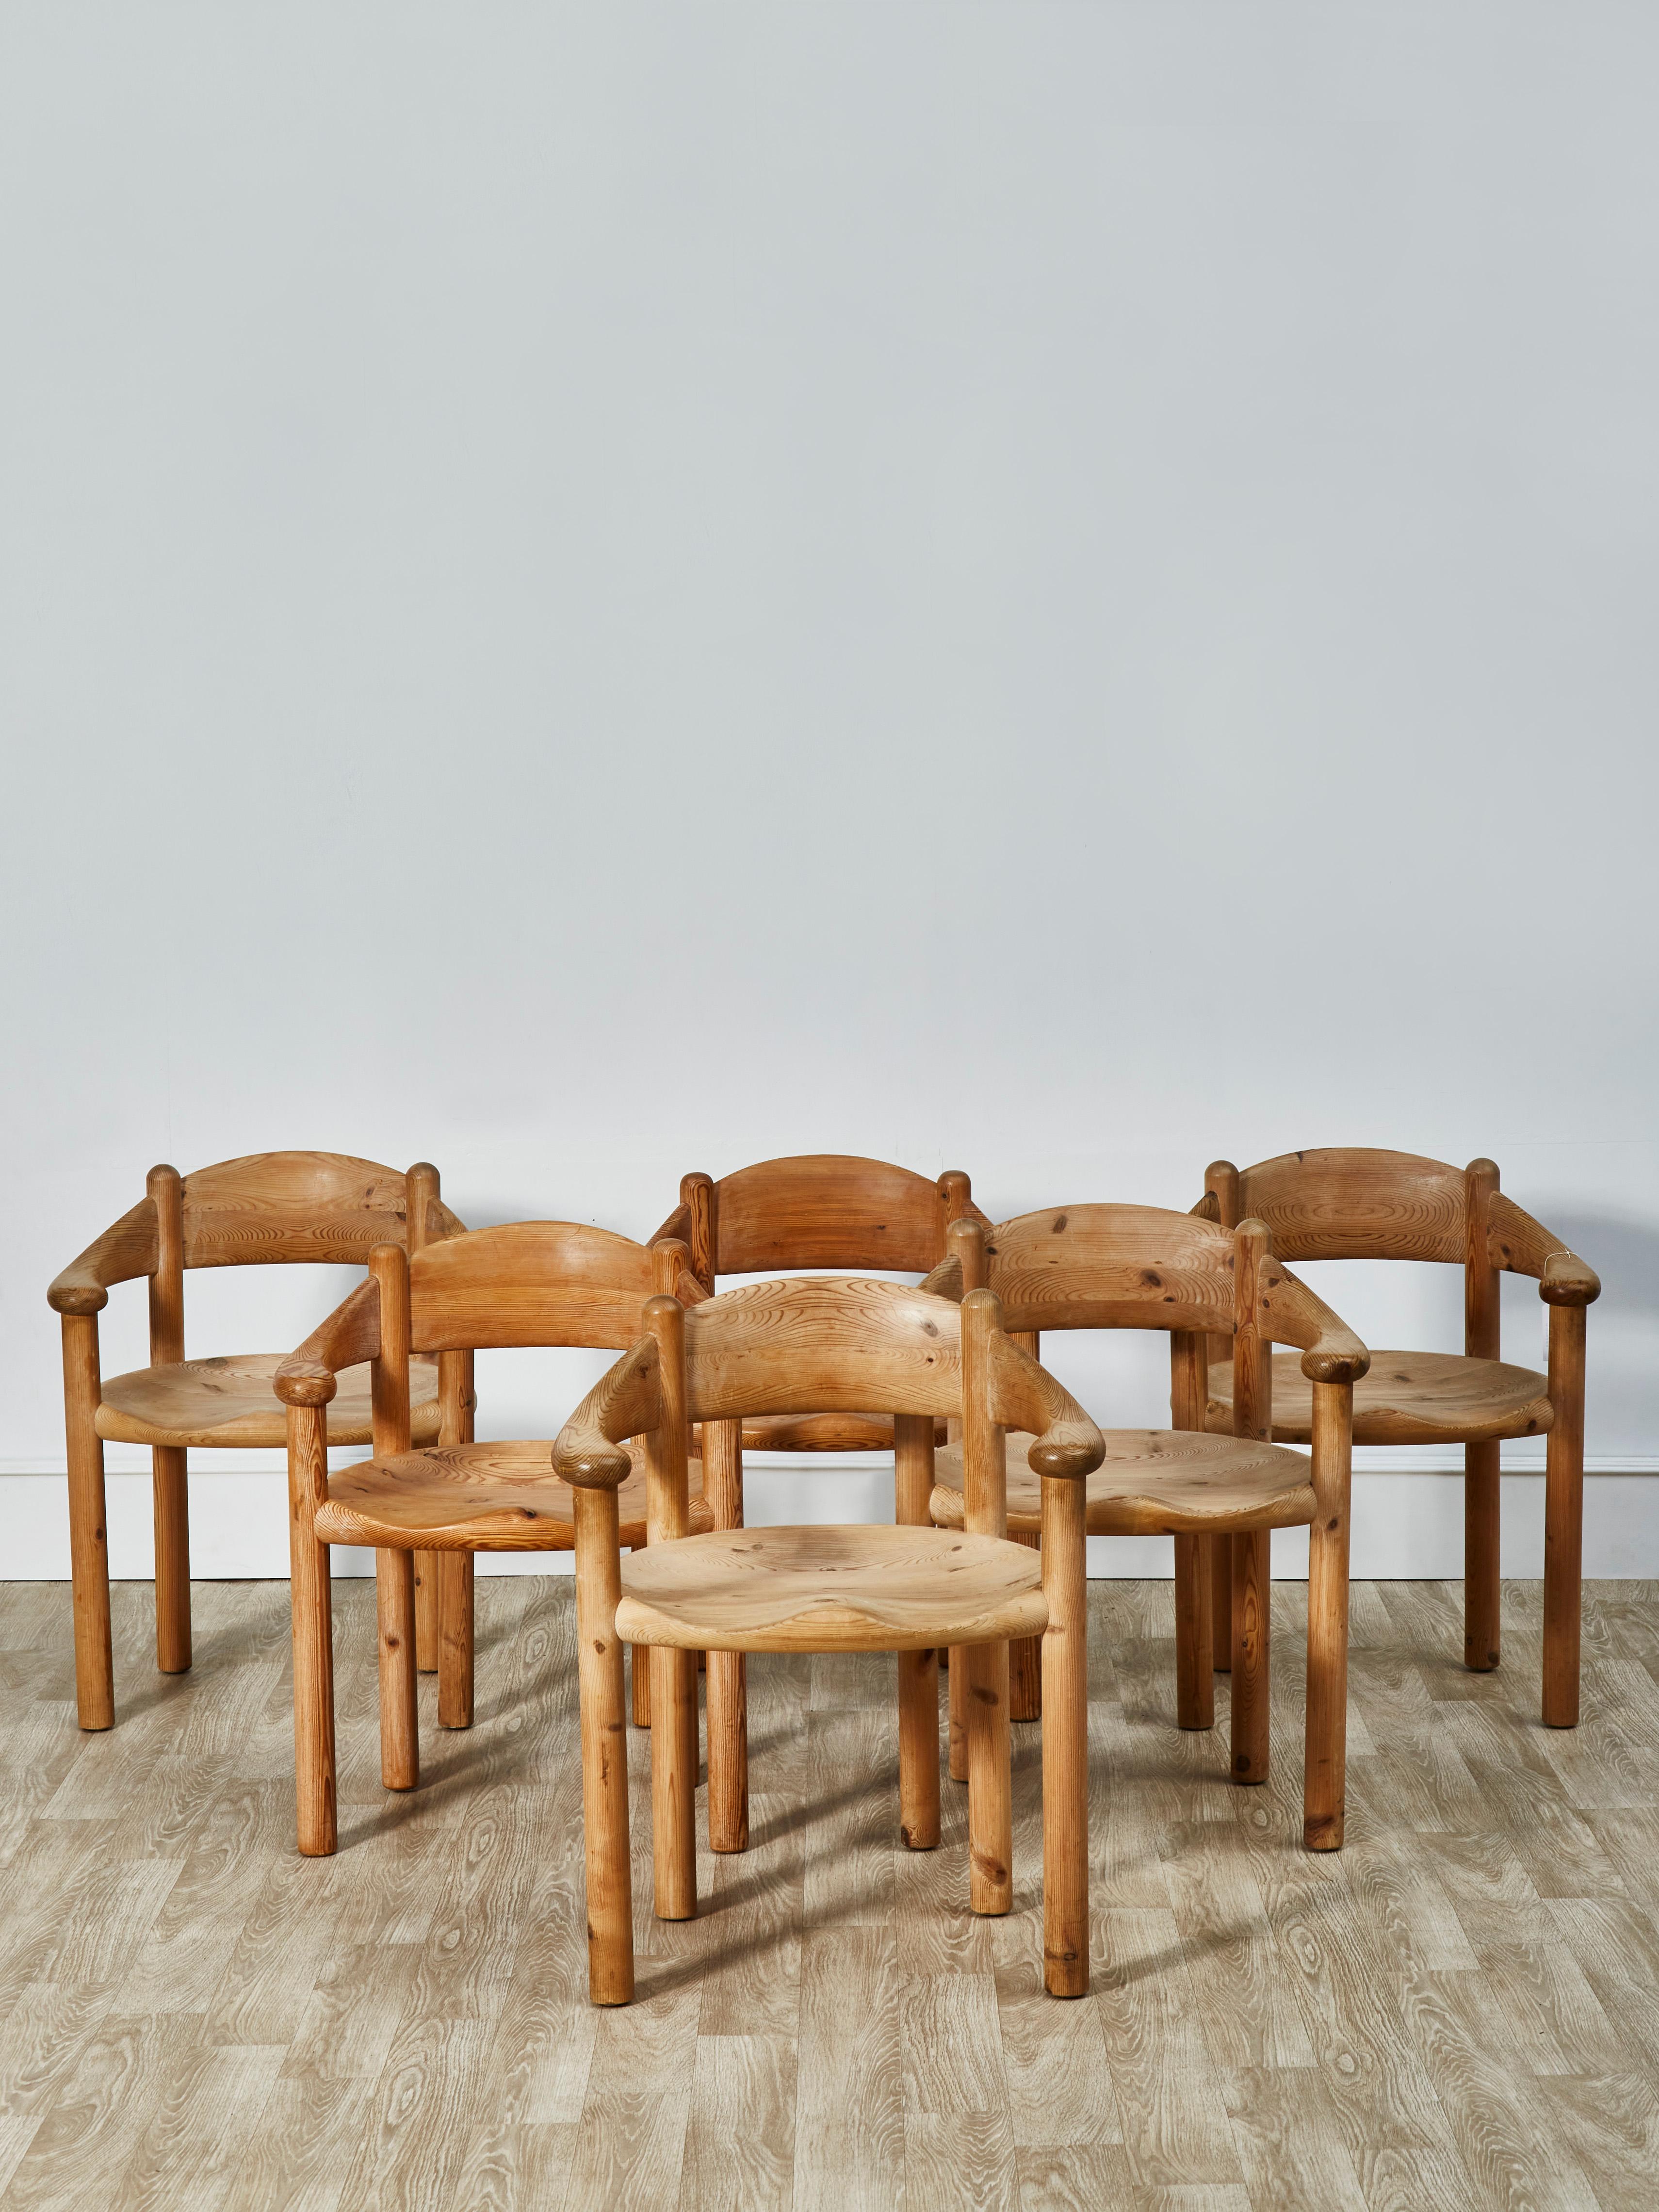 Vintage set of 8 wooden dining room chairs.
France, 1970s.